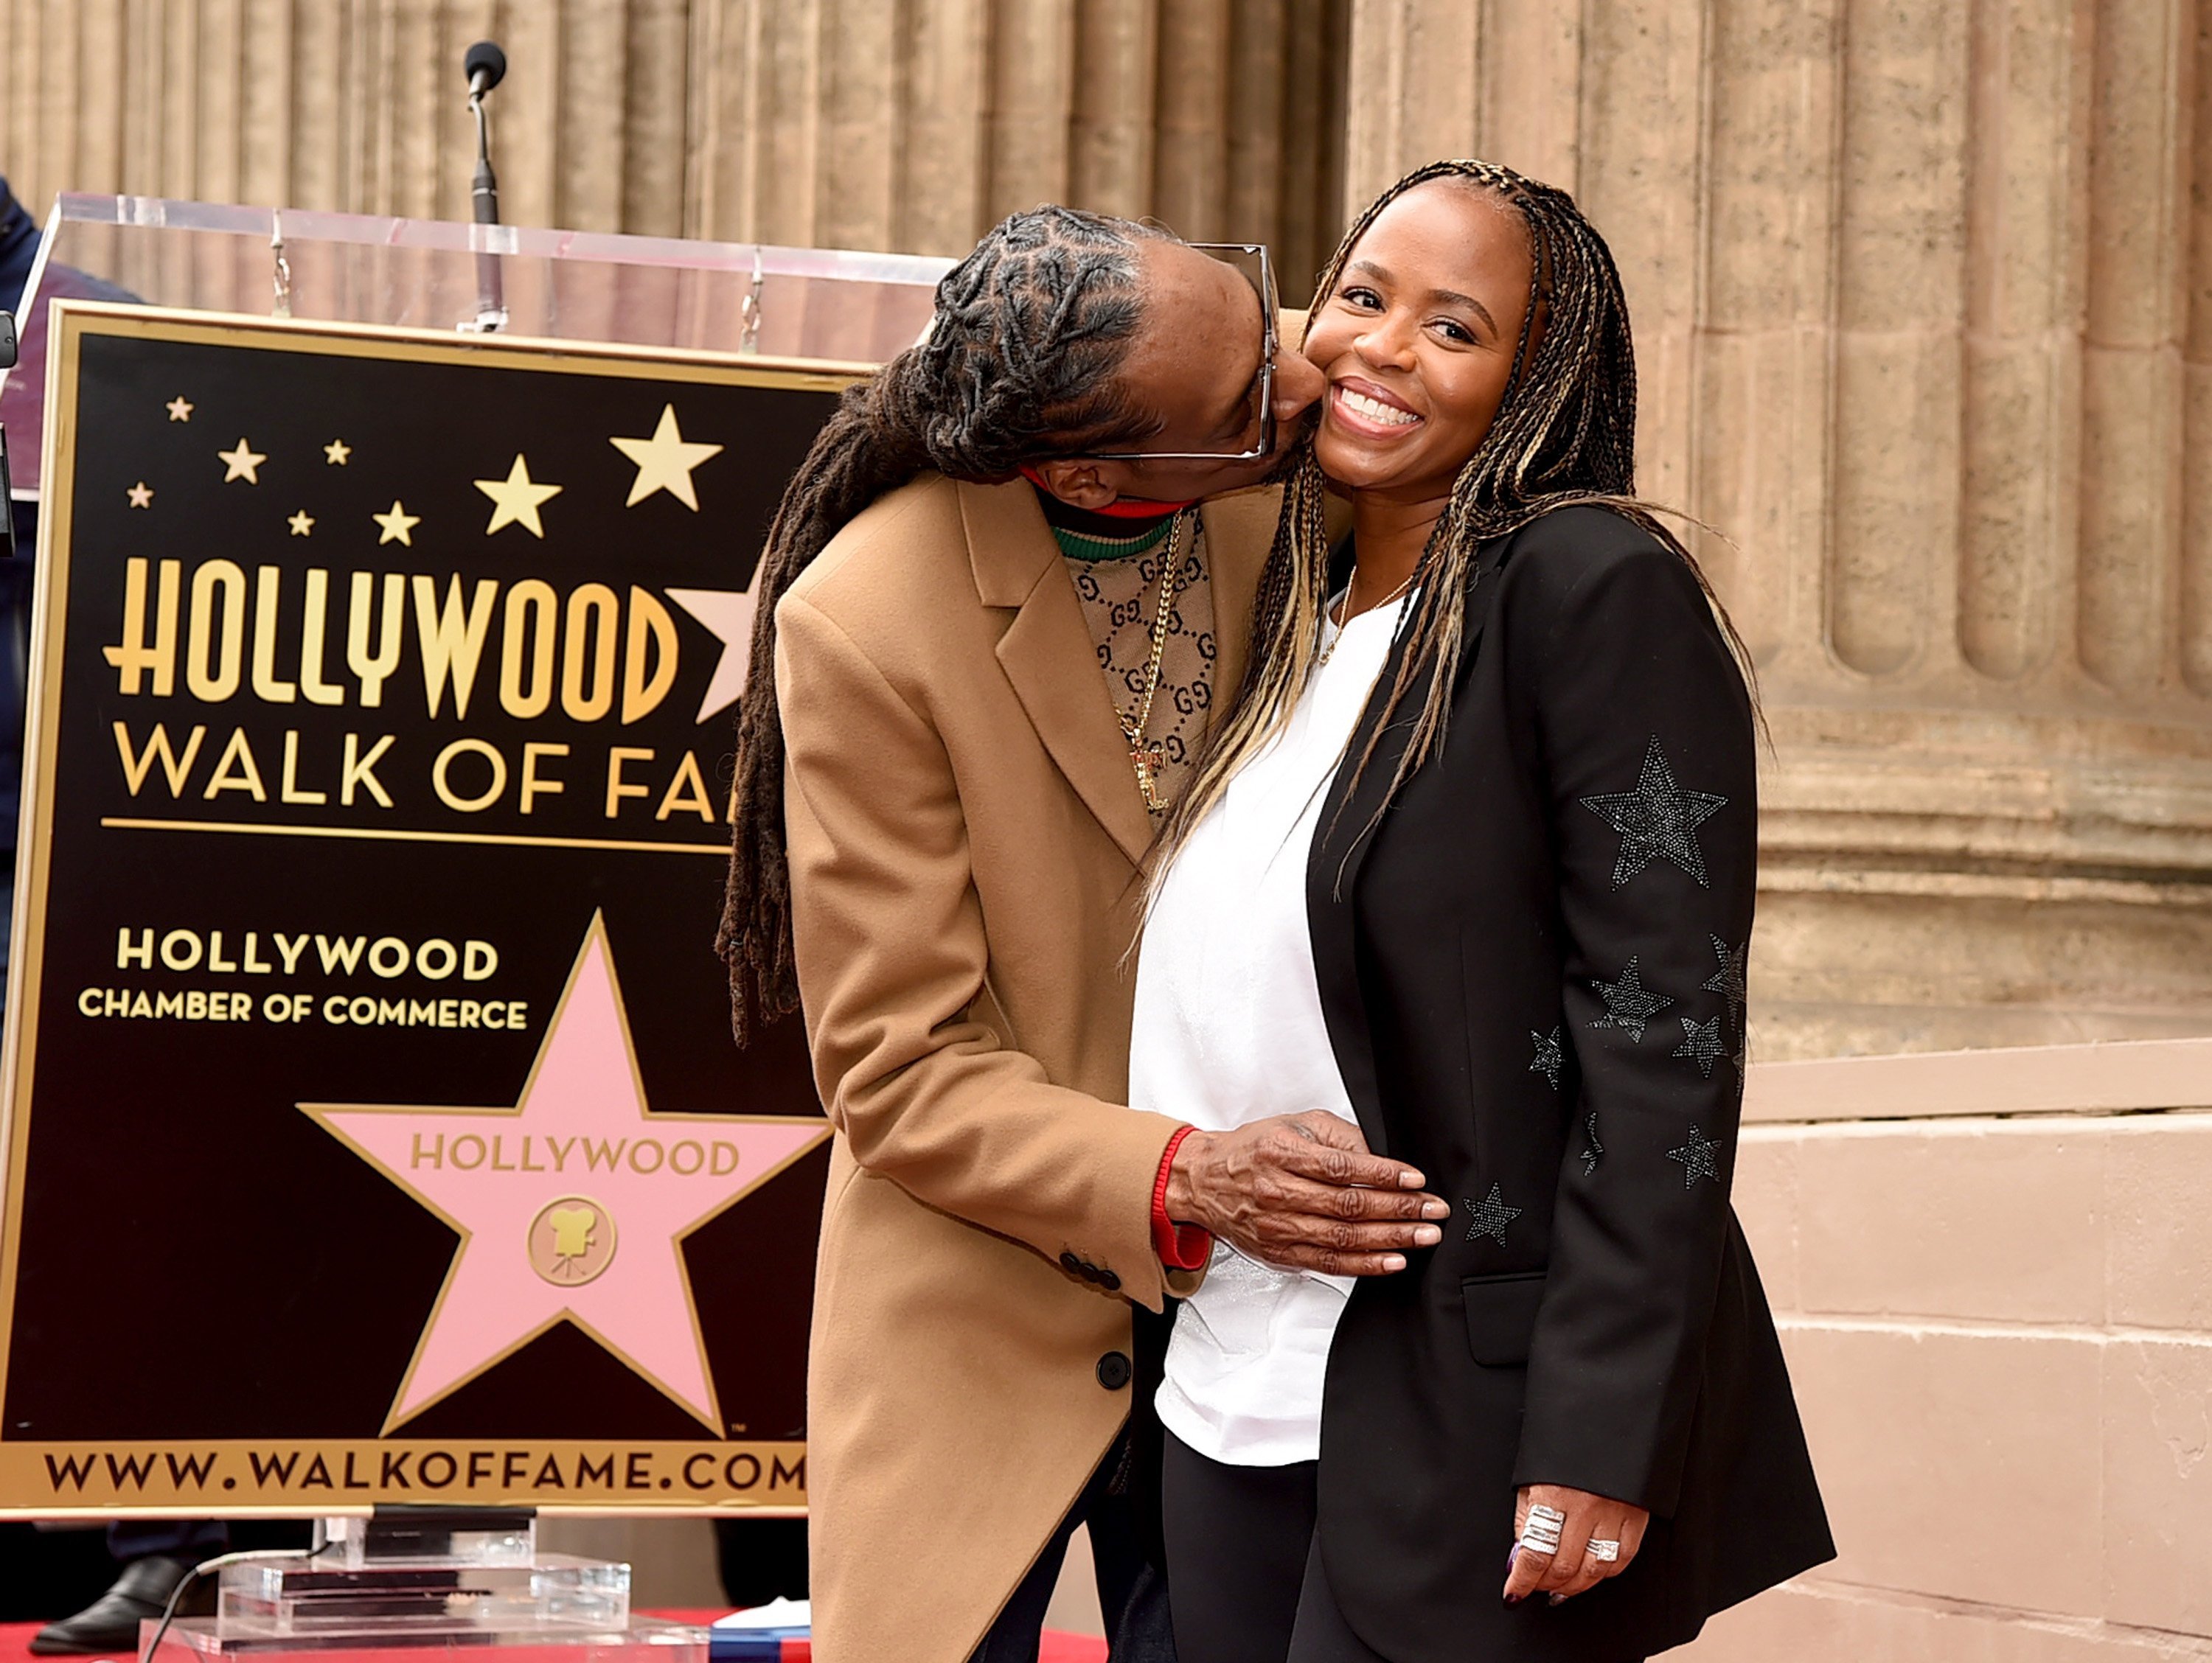 Snoop Dogg and Shante Broadus accept his own Hollywood Walk of Fame Star on November 19, 2018 | Source: Getty Images/GlobalImagesUkraine